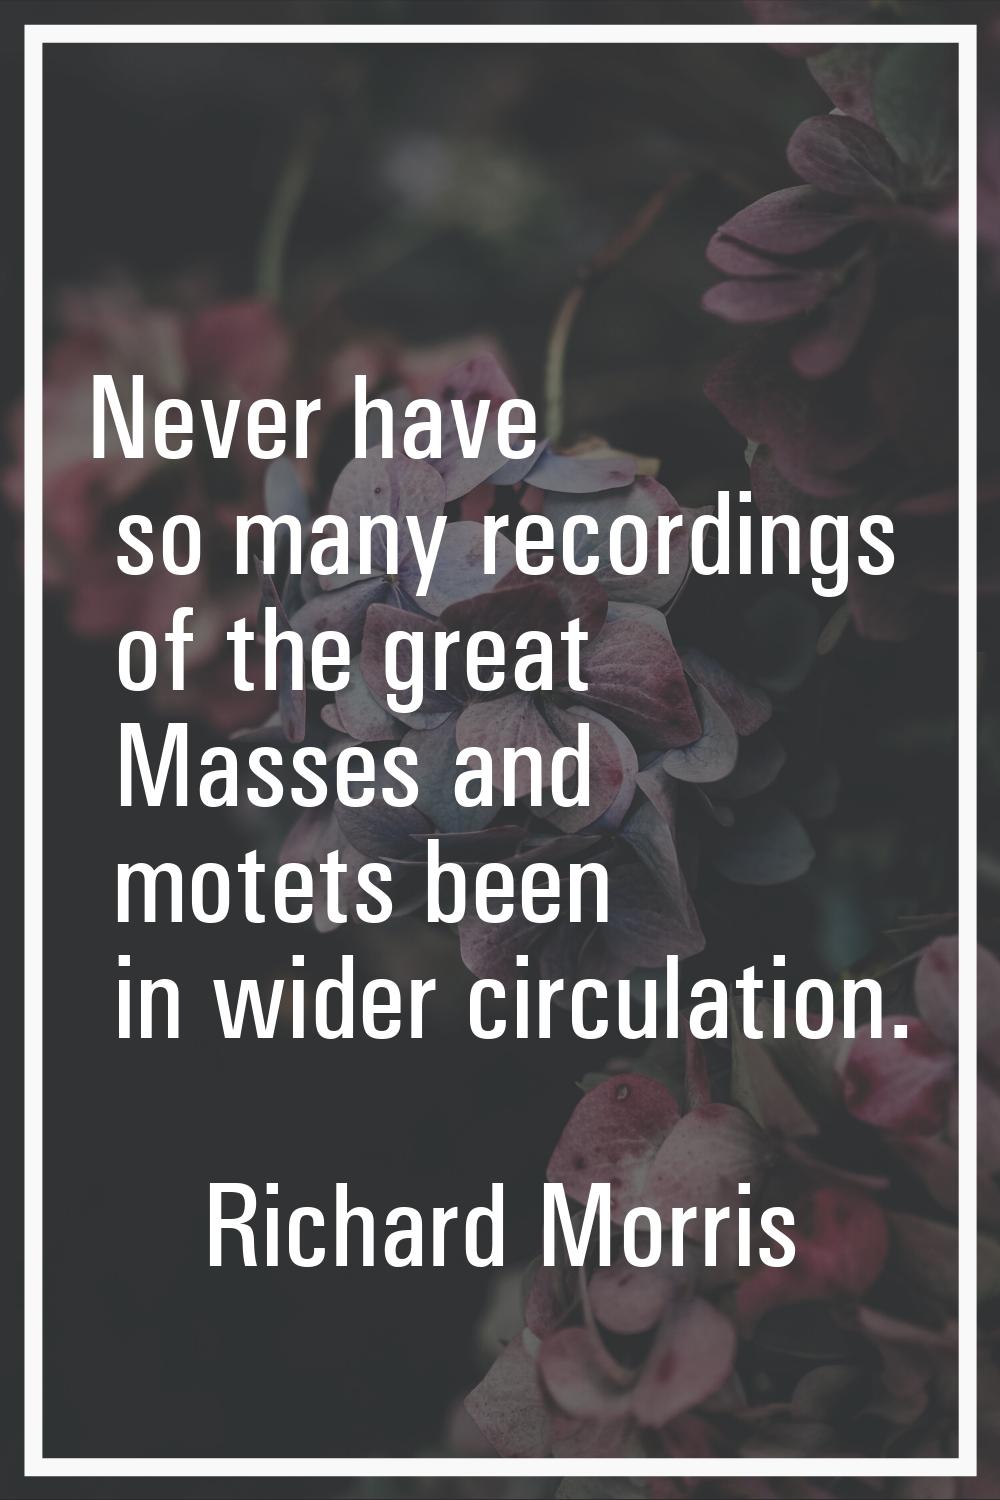 Never have so many recordings of the great Masses and motets been in wider circulation.